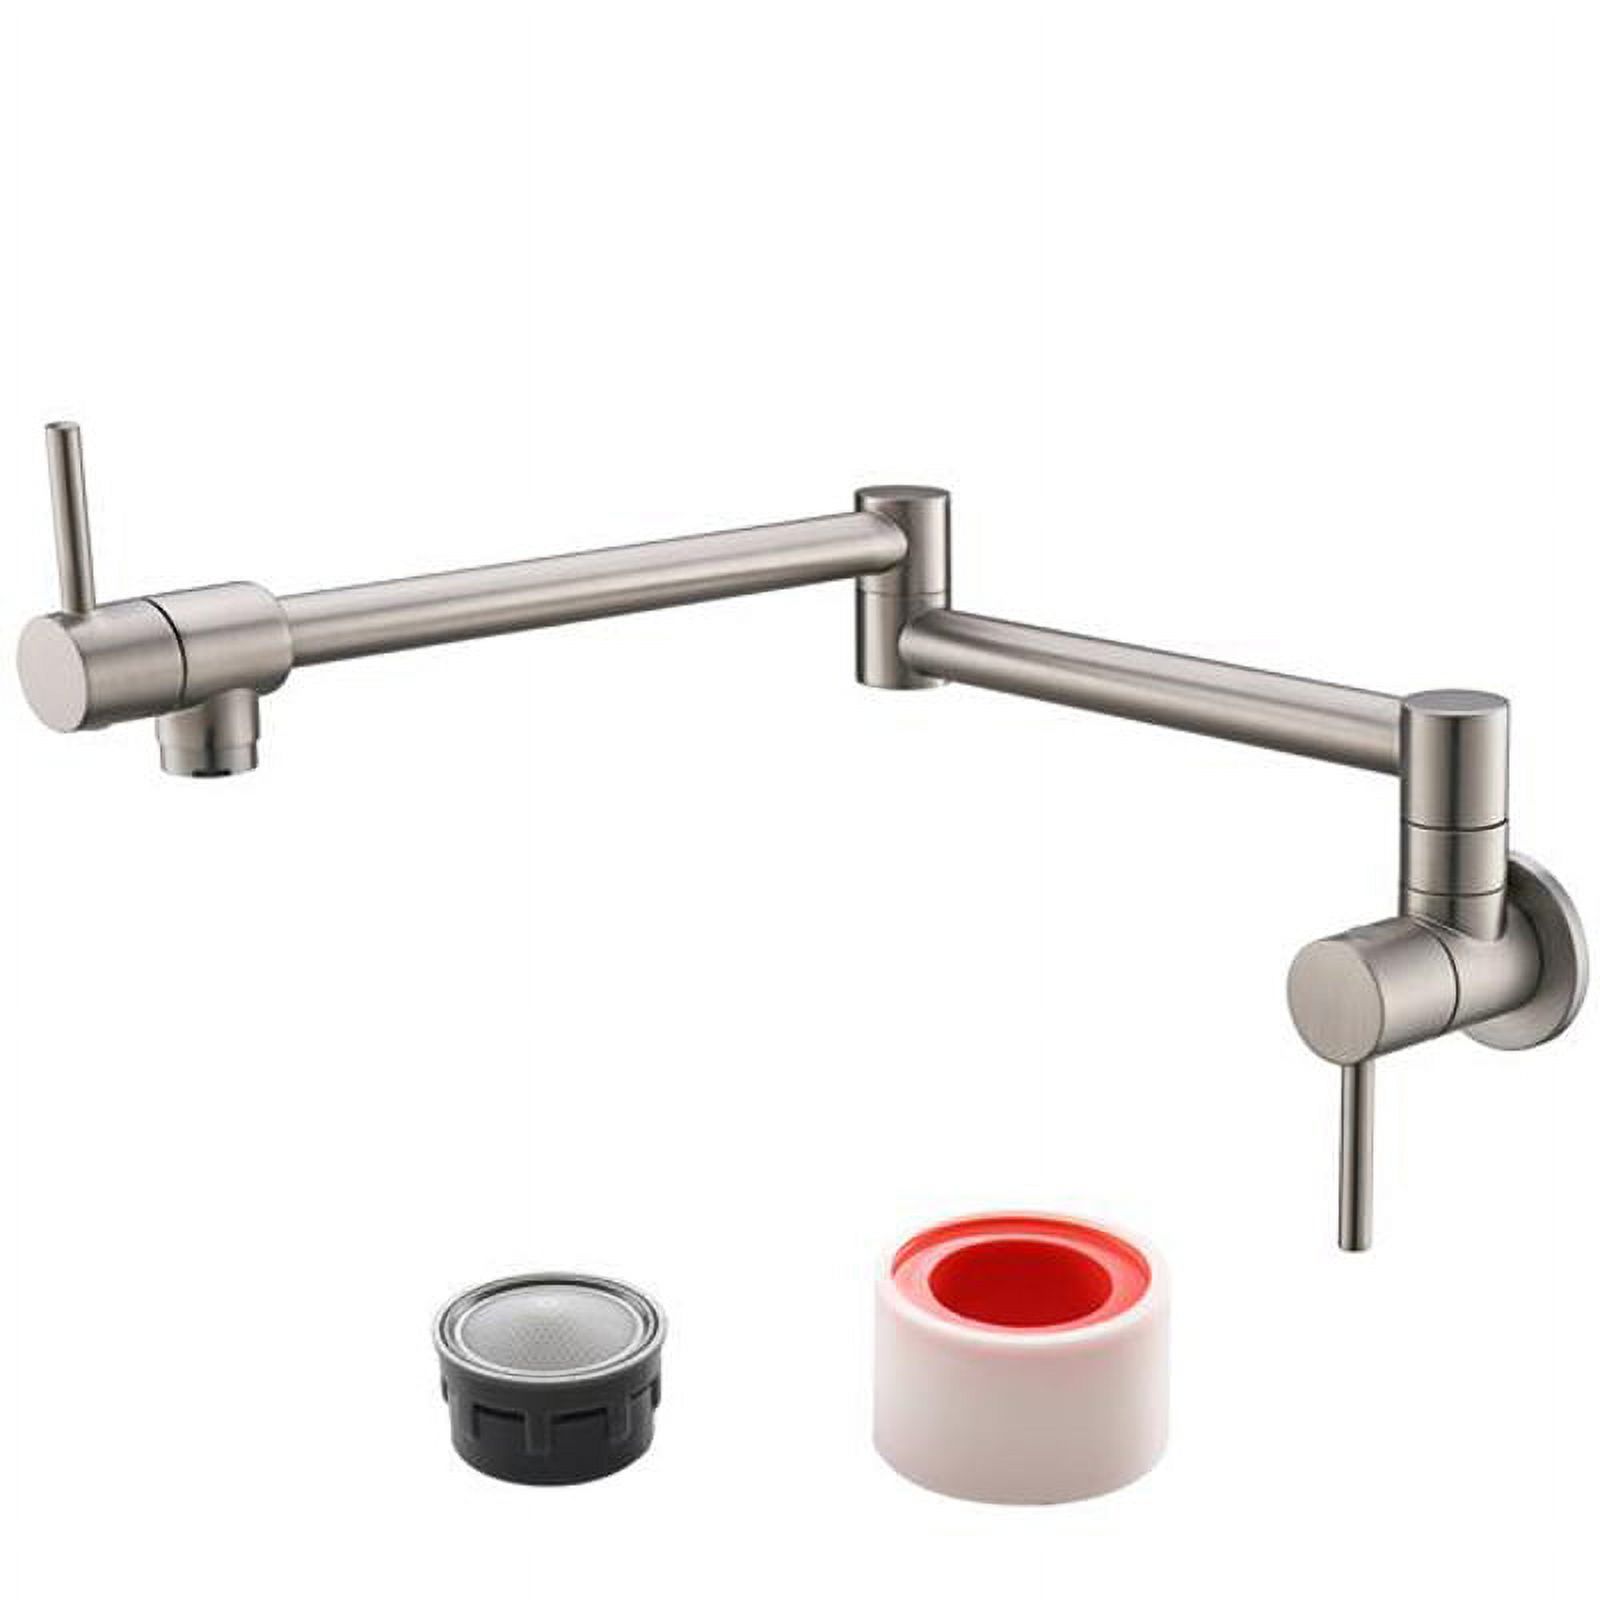 Wall Mount Kitchen Faucet 1/2” Brass Folding Pot Filler Tap Single Hole Kitchen Sink Tap for Cold Water, Silver - image 1 of 7